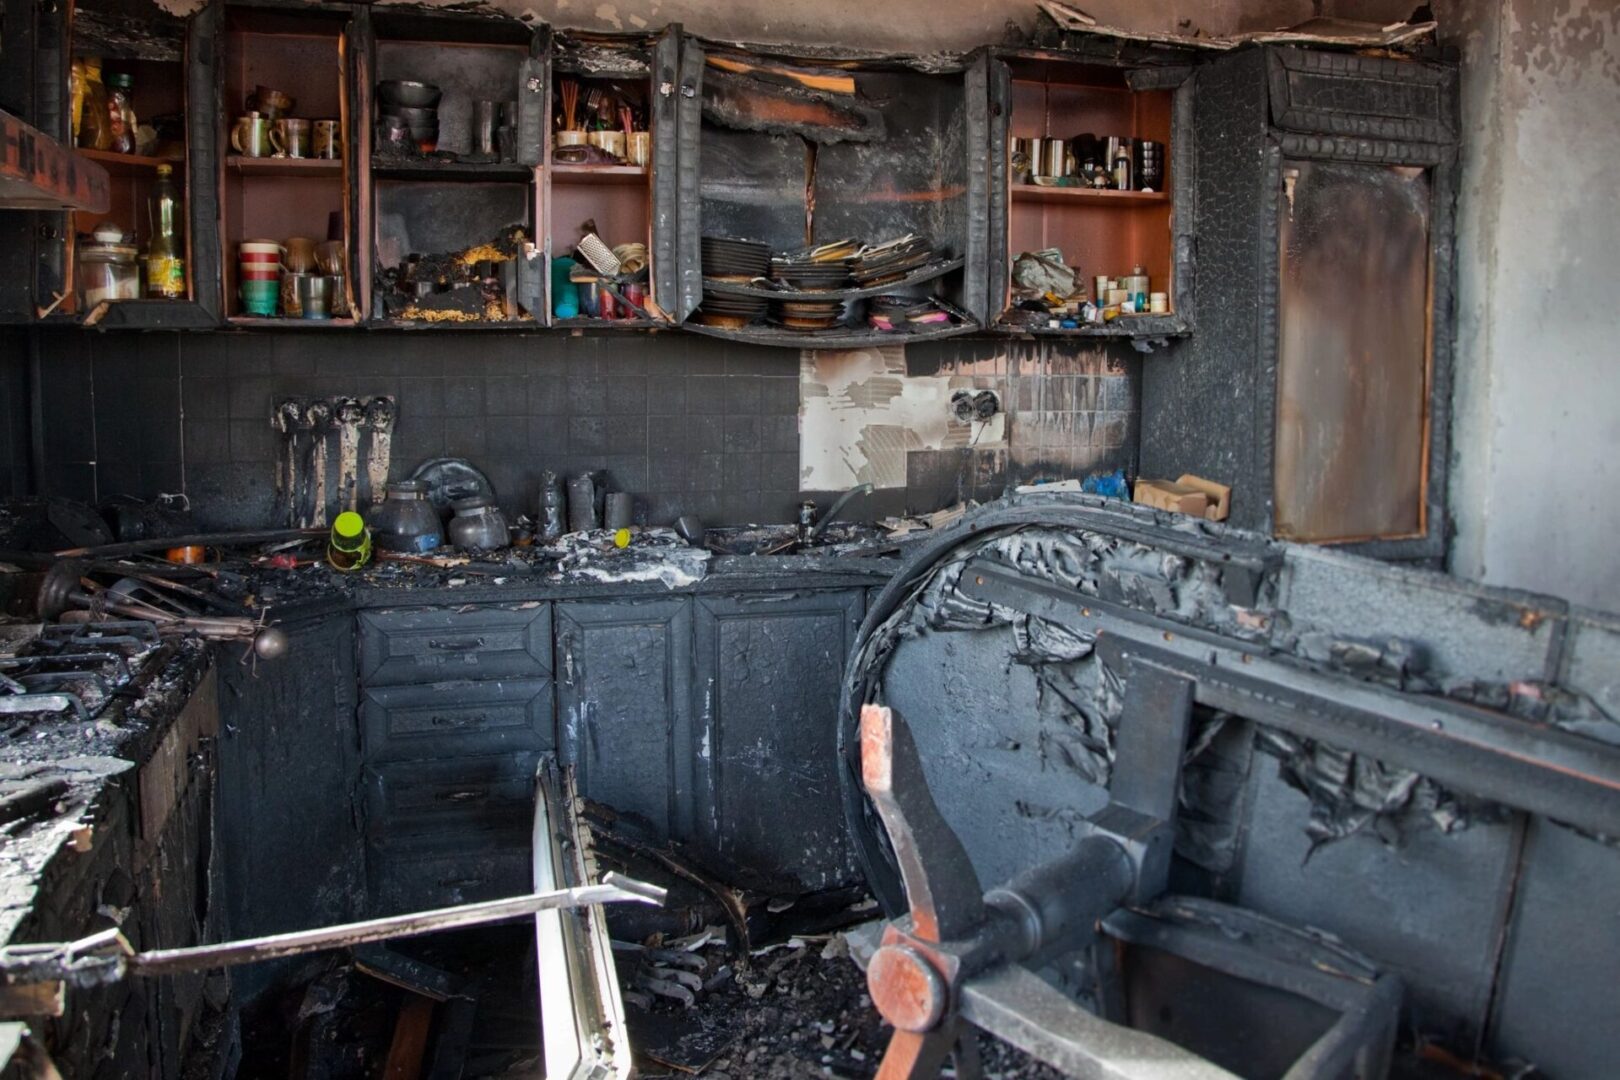 A kitchen with black paint and fire damage.